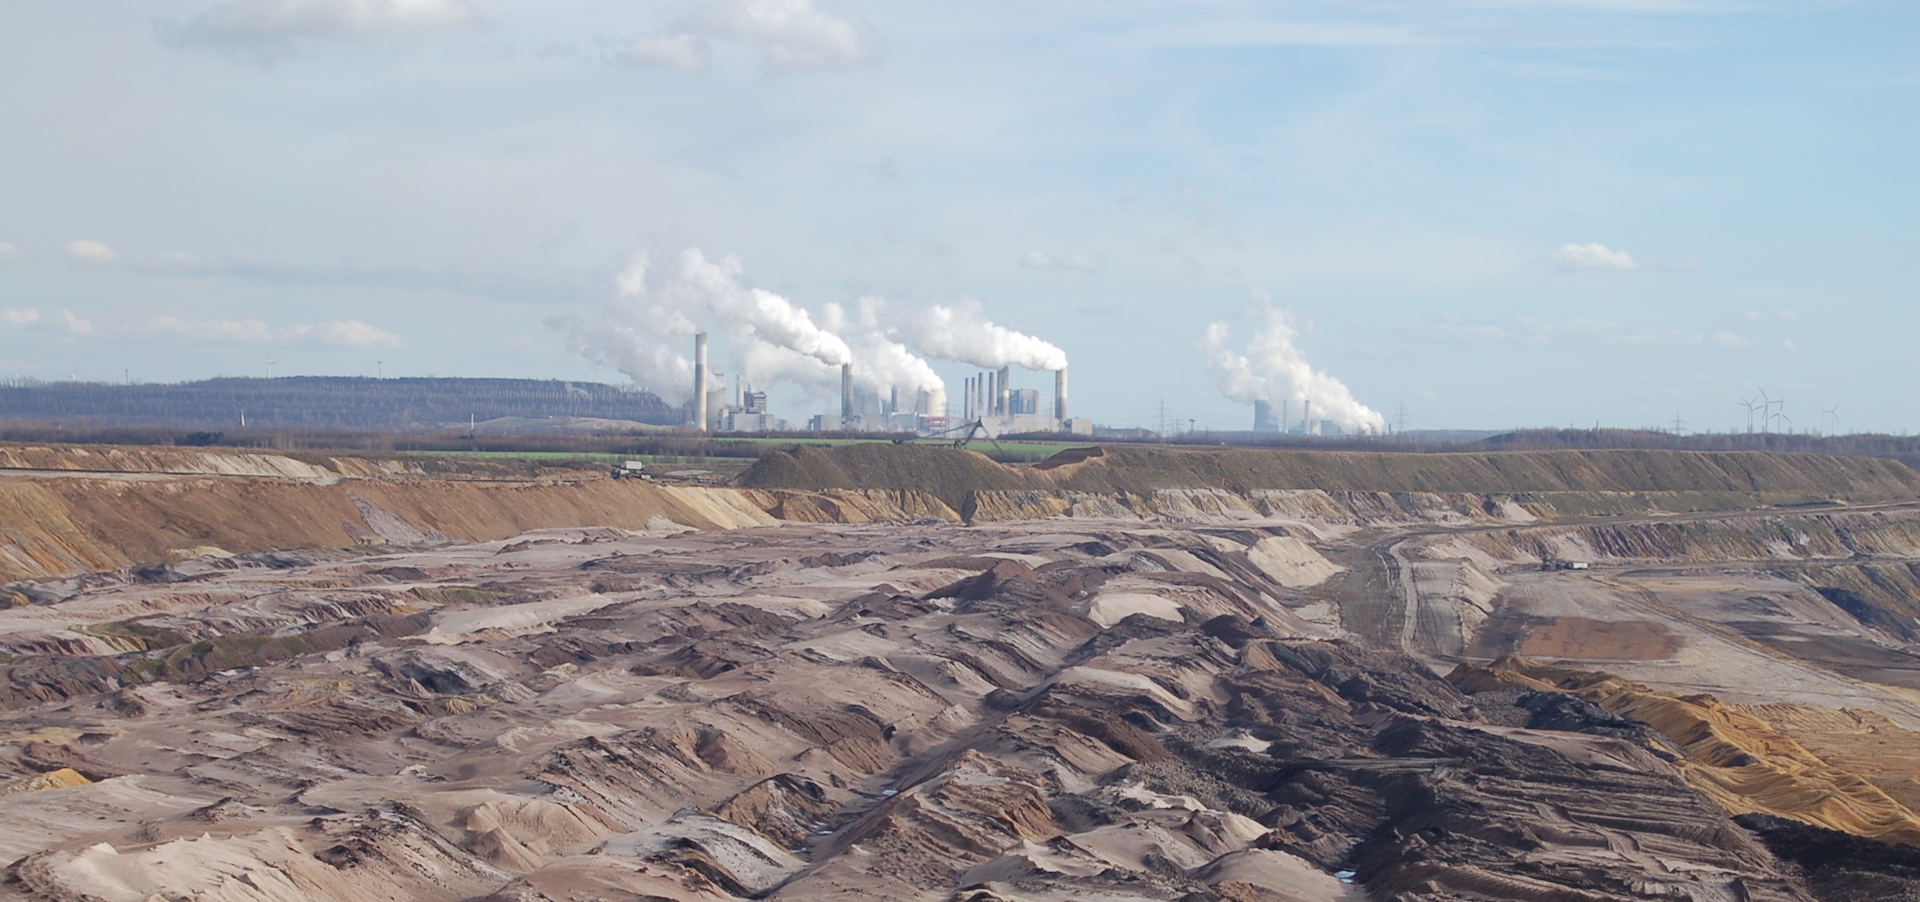 view of lignite lining fields with coal plant in the background